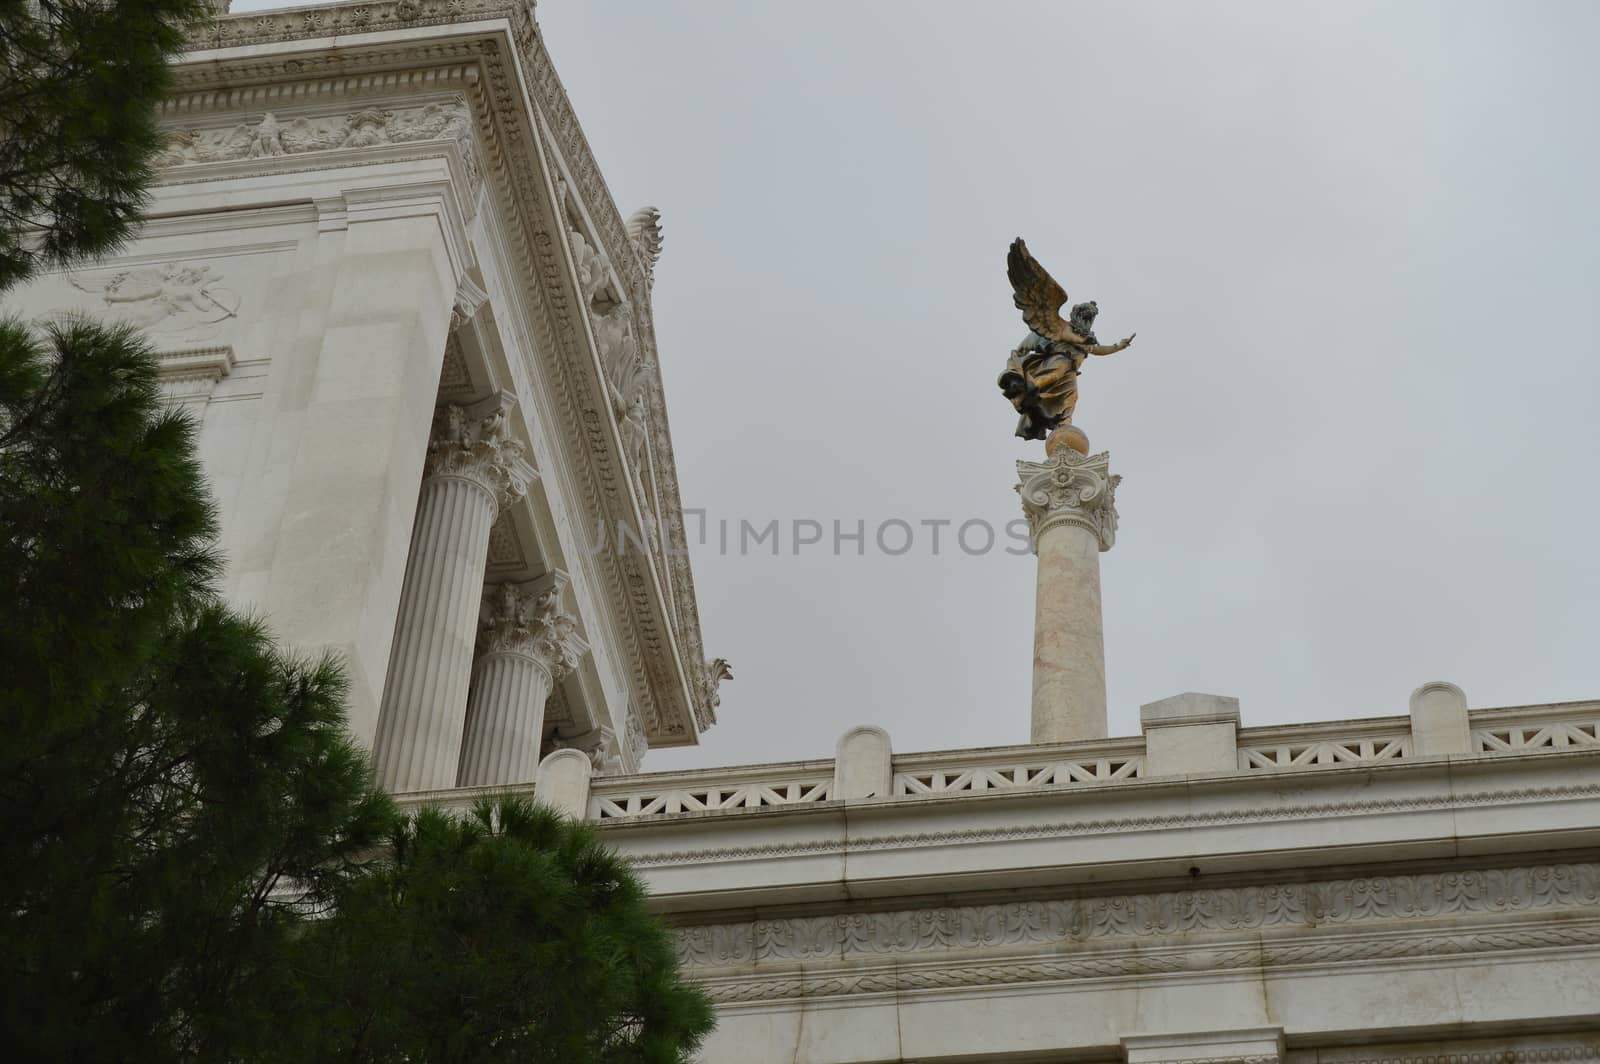 Rome, Lazio region, Italy, Detail of the national monument of Vittorio Emanuele II, named Vittoriano or Altare della Patria. View from sea pines, October 7, 2018 by claire_lucia